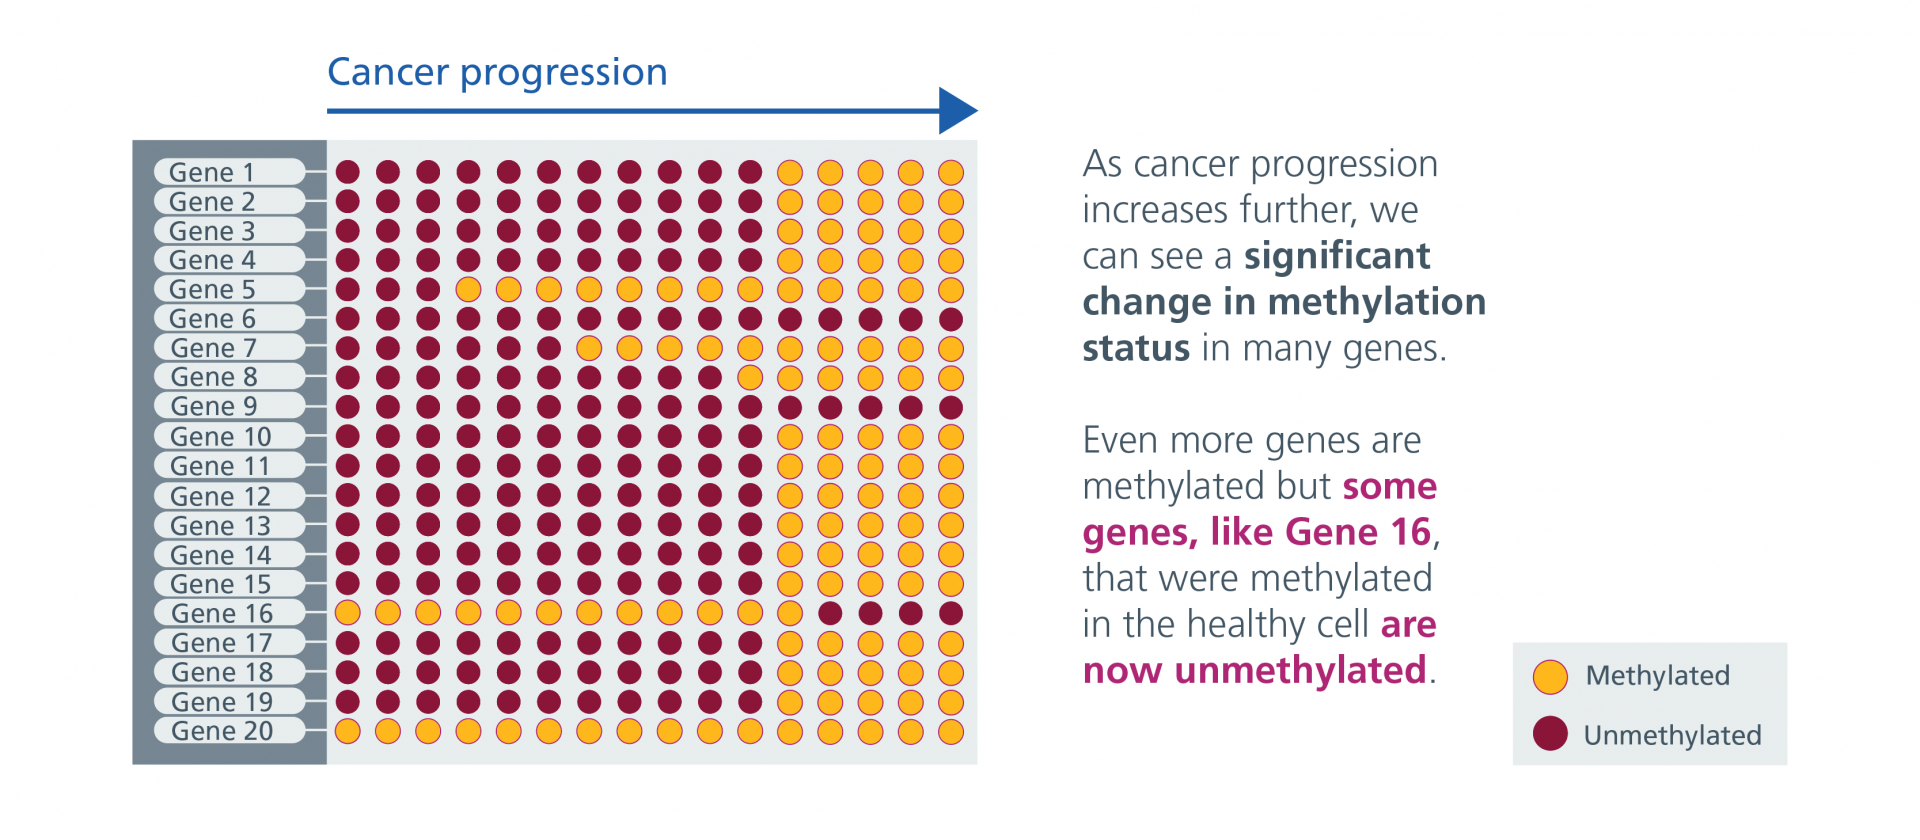 Cancer progresses further and methylation change continues. Even more genes are methylated but some genes that were methylated in the healthy cell are now unmethylated.